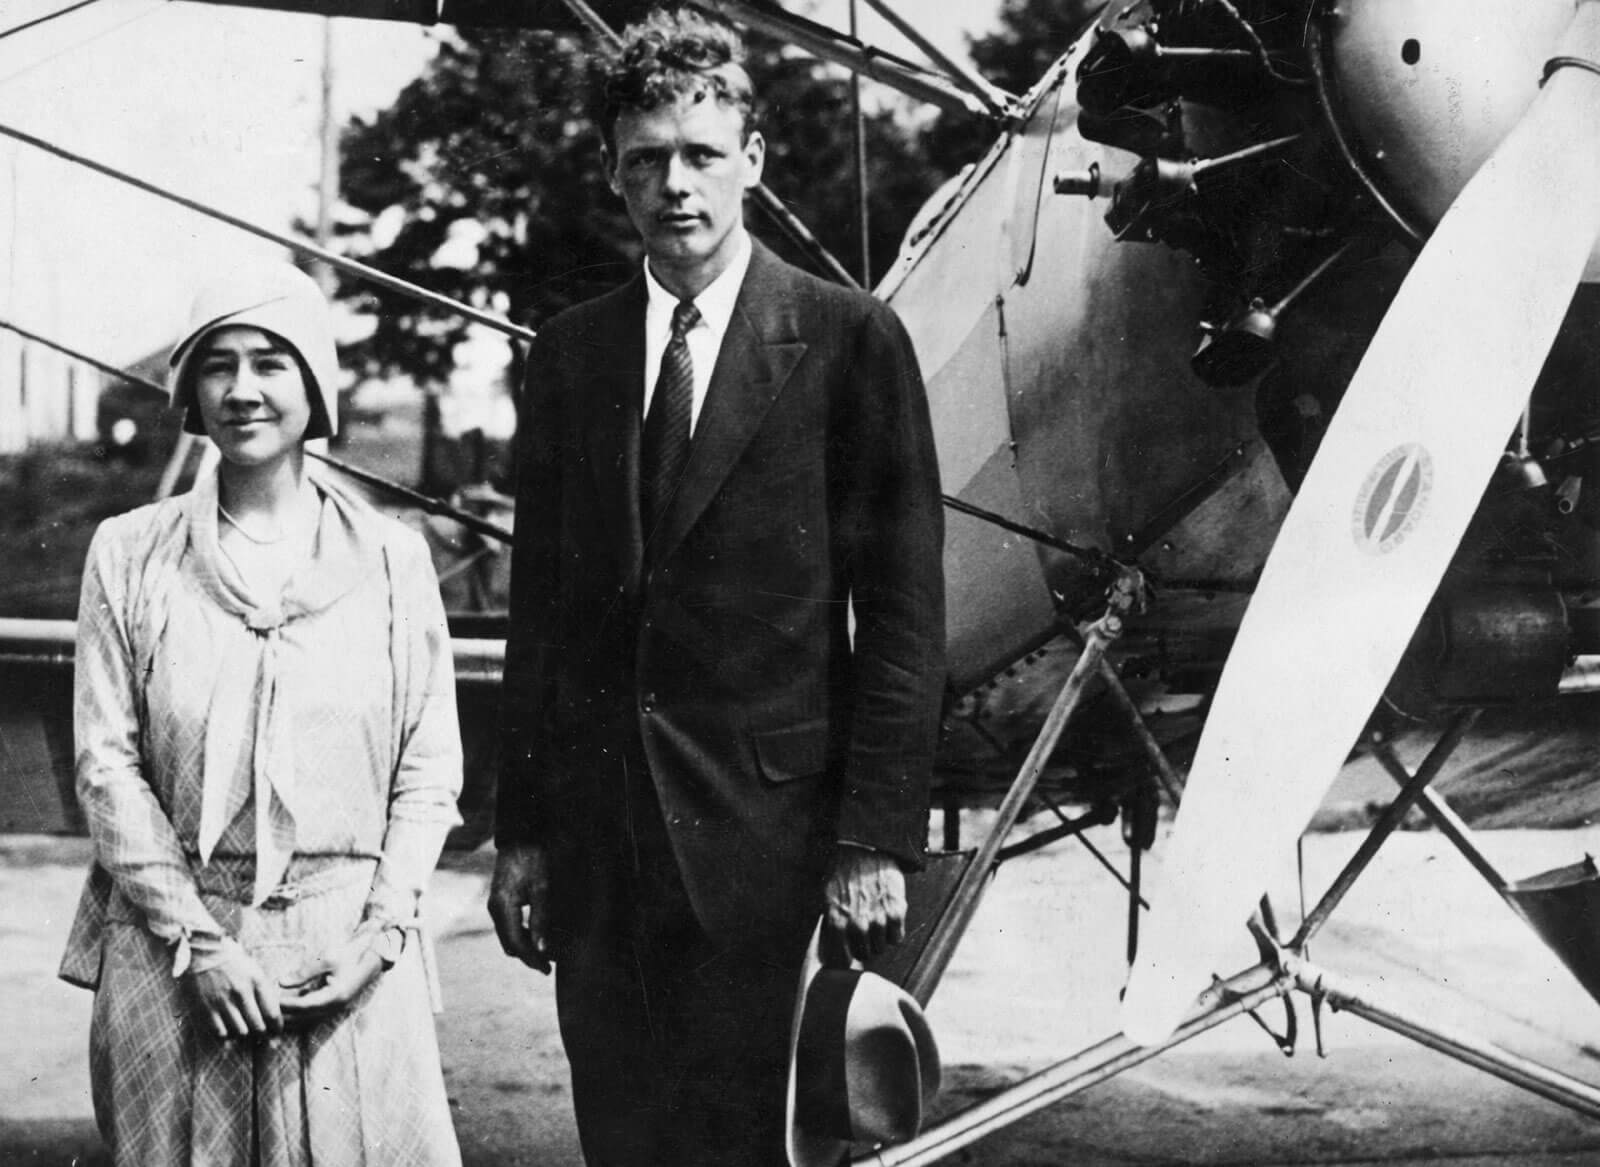 Anne and Charles Lindbergh. Photo credit: Hulton Archive/Getty Images